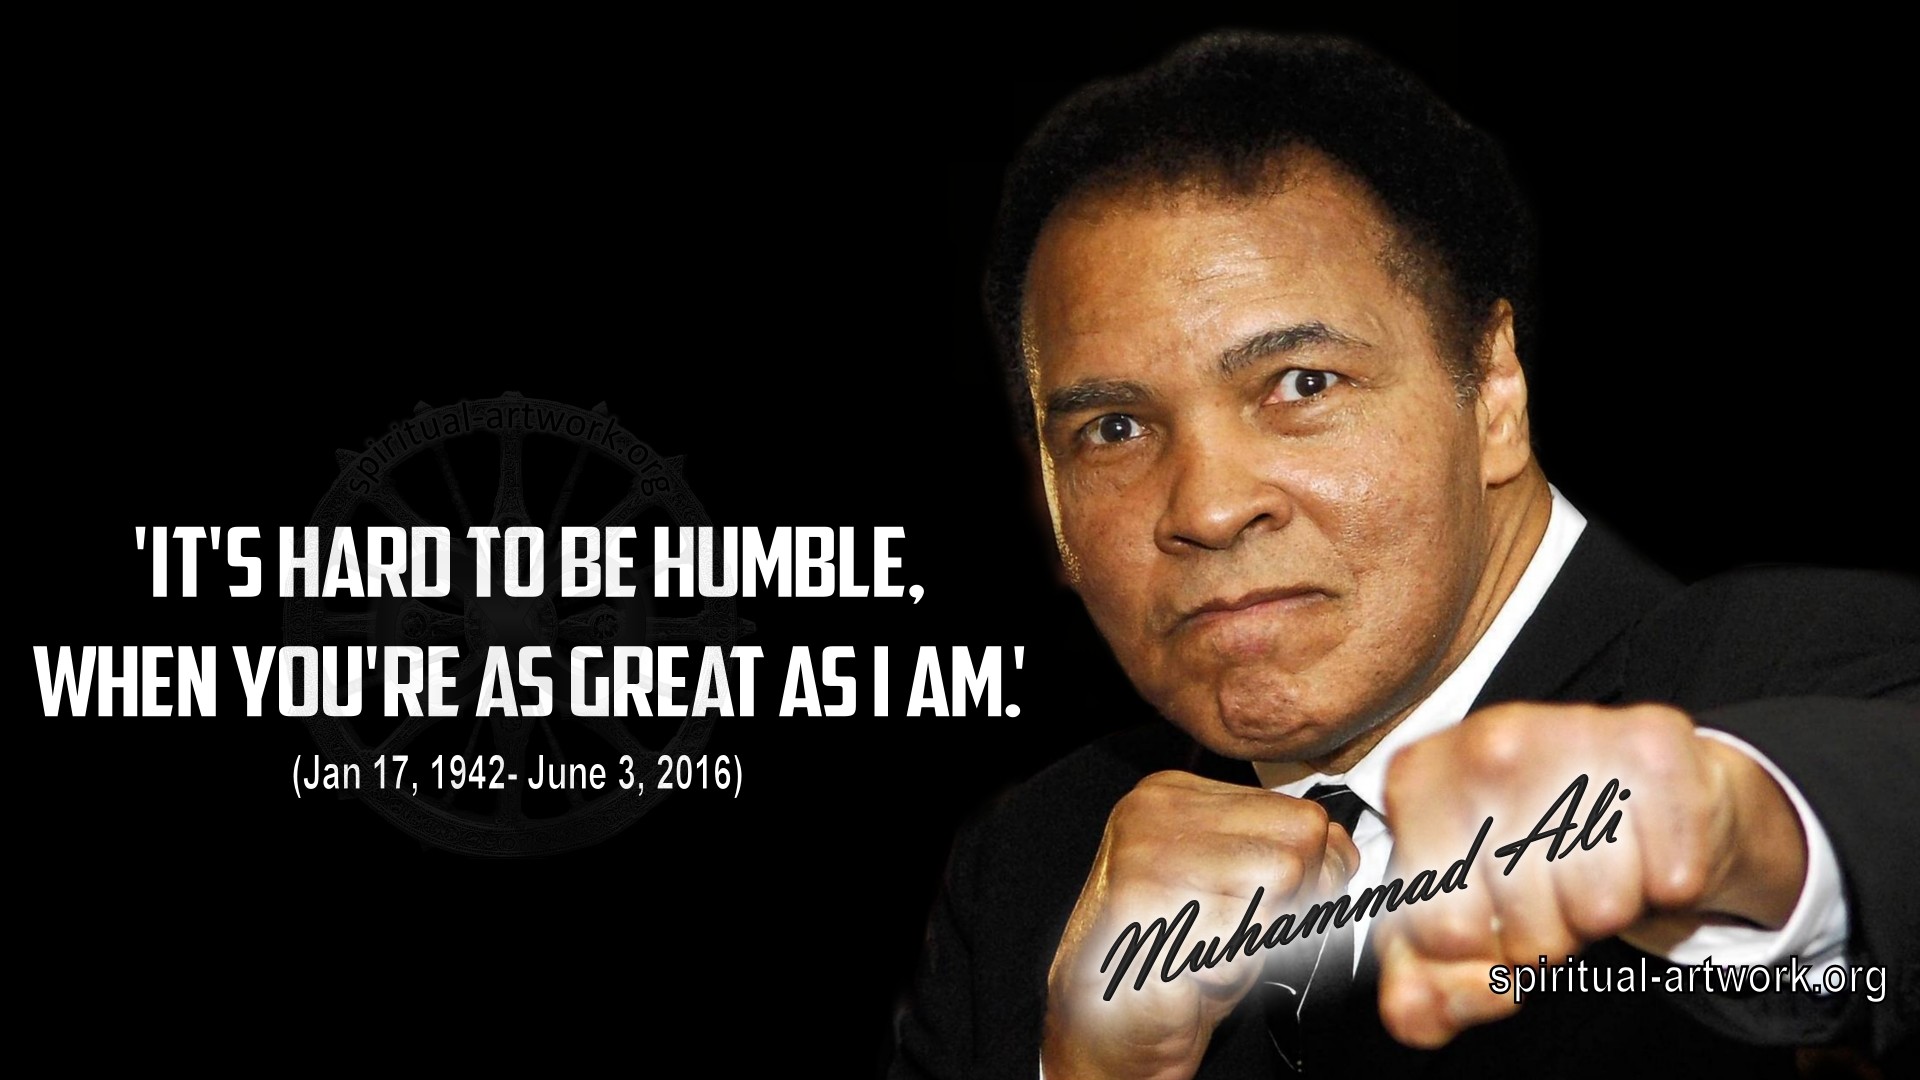 Muhammad Ali Its Hard to be Humble when youre as great as I